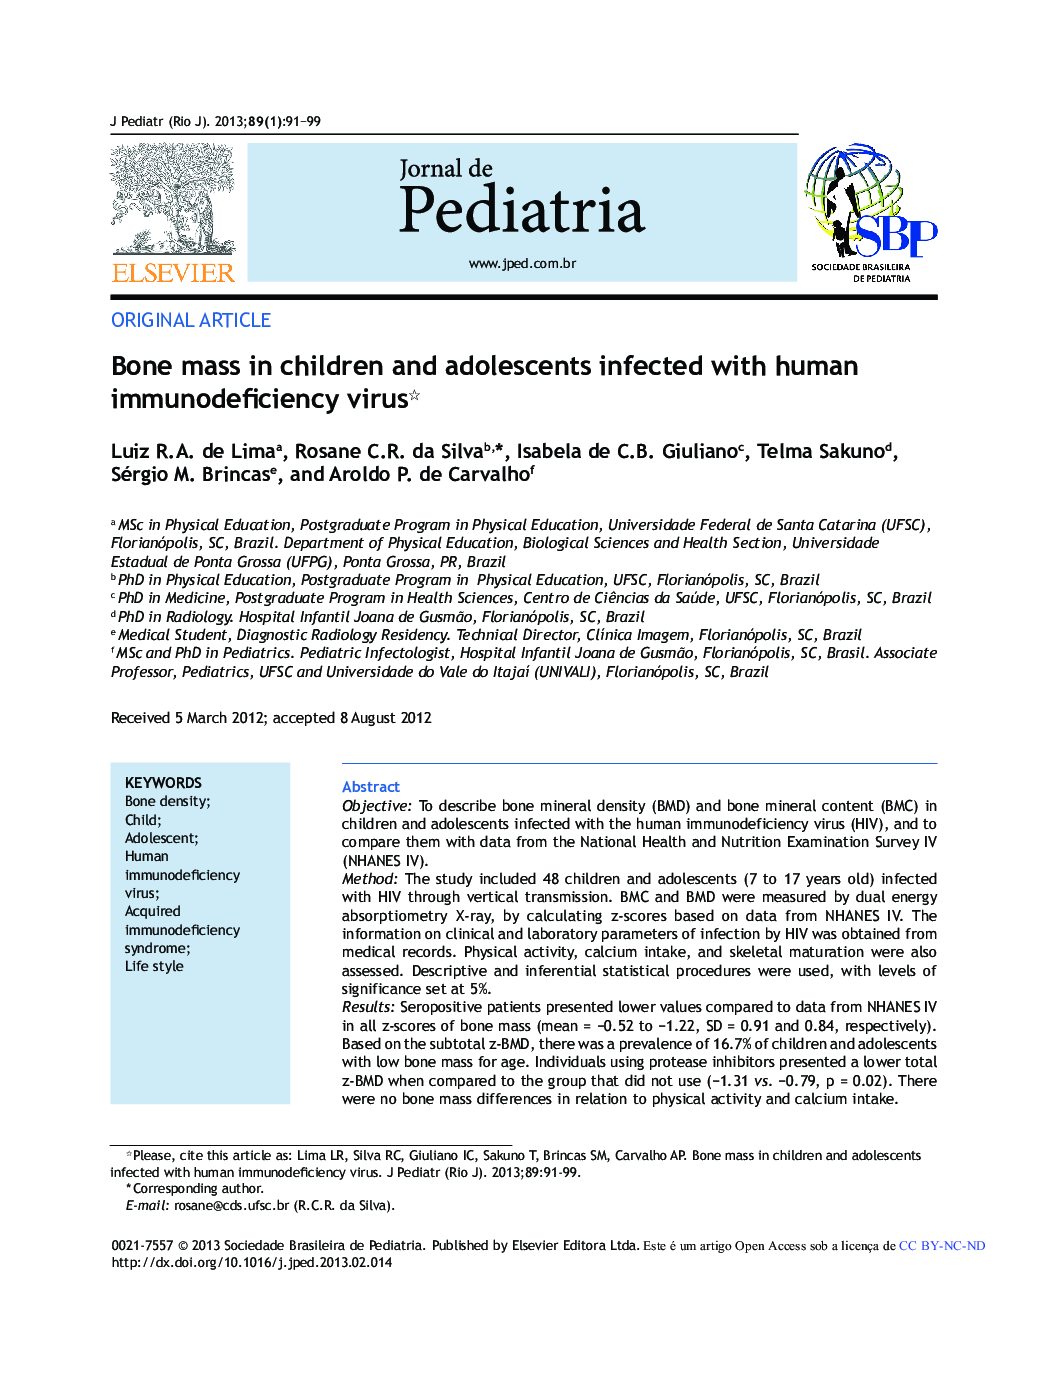 Bone Mass in Children and Adolescents Infected with Human Immunodeficiency Virus 